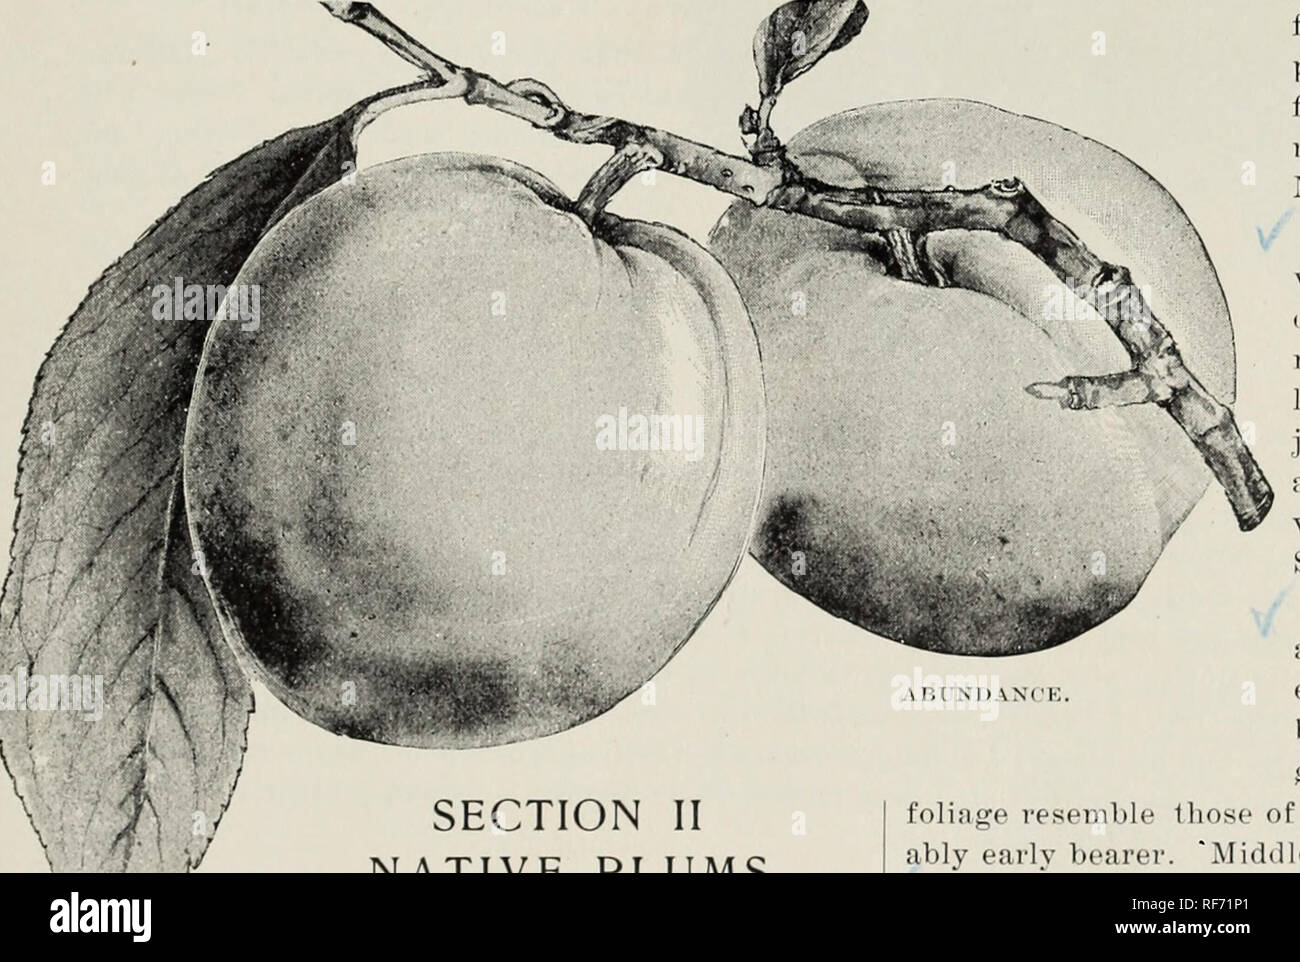 . Handbook of fruit trees and plants. Nursery stock Pennsylvania West Chester Catalogs; Nurseries (Horticulture) Pennsylvania West Chester Catalogs; Fruit trees Seedlings Catalogs; Fruit Catalogs. SELECT LIST OF CHOICE FRUITS — PLUMS 19 Imperial Gage. Above raediuin, oval; pale green until fully ripe, when it is tinged with yellow; flesh greenish, juicy, melting, rich and fine flavored. Quality best; very prolific. Early September. Lombard. Medium, roundish oval; delicate violet- red, with a thin bloom; flesh yellow, juicy and agreeable, adhering to the stotie. Tree very vigor- ous, hardy and  Stock Photo